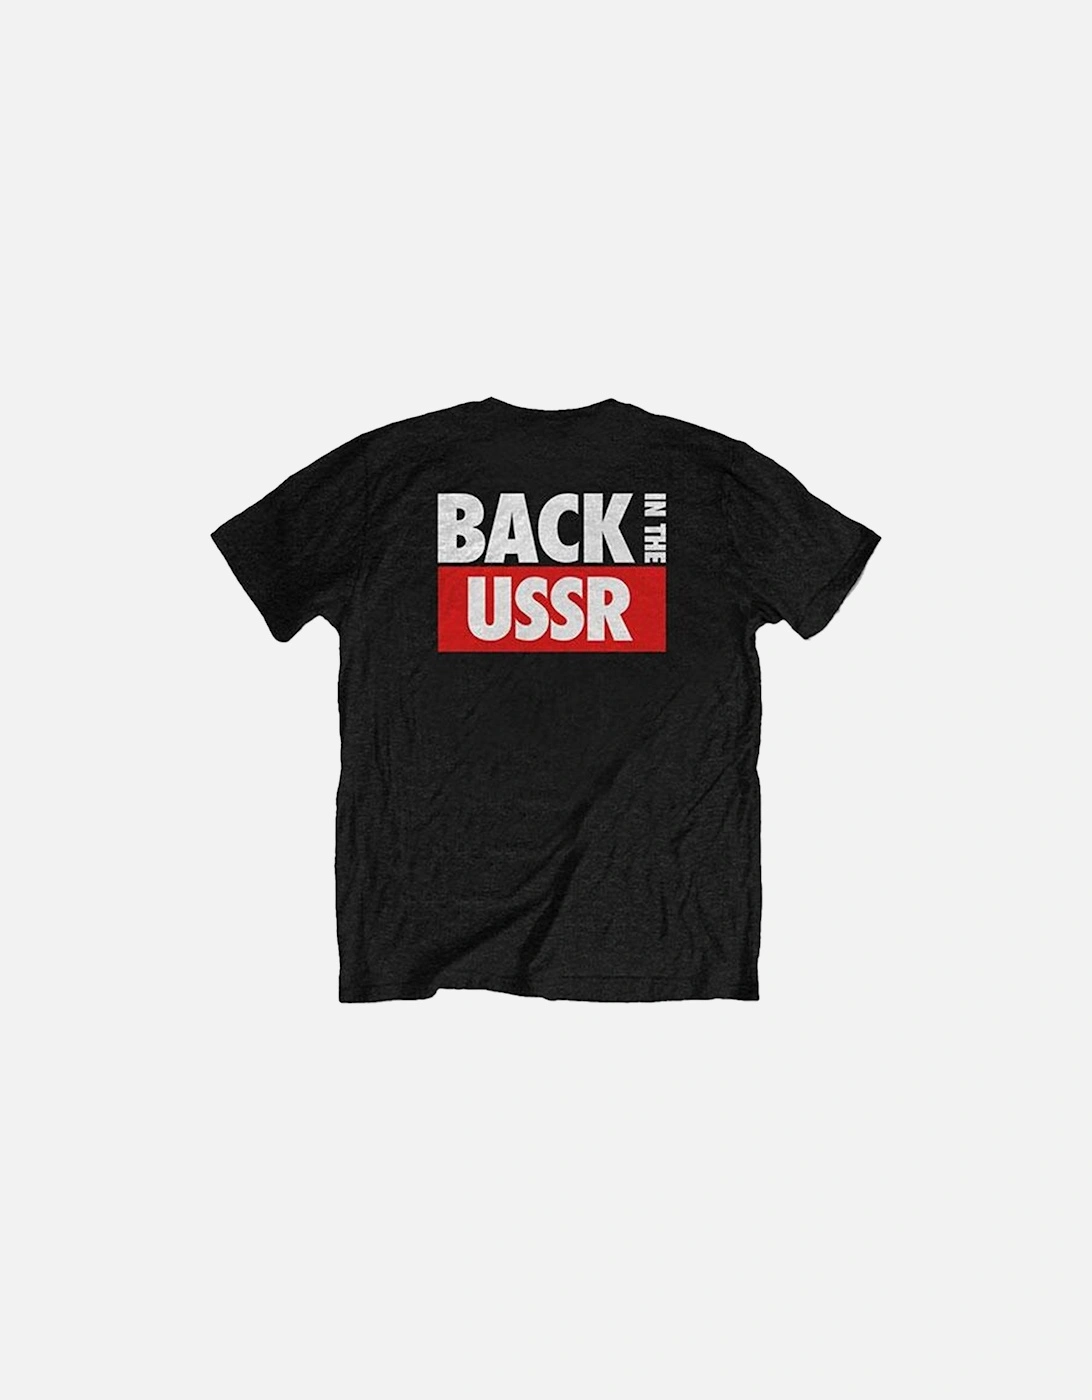 Unisex Adult Back In The USSR Cotton T-Shirt